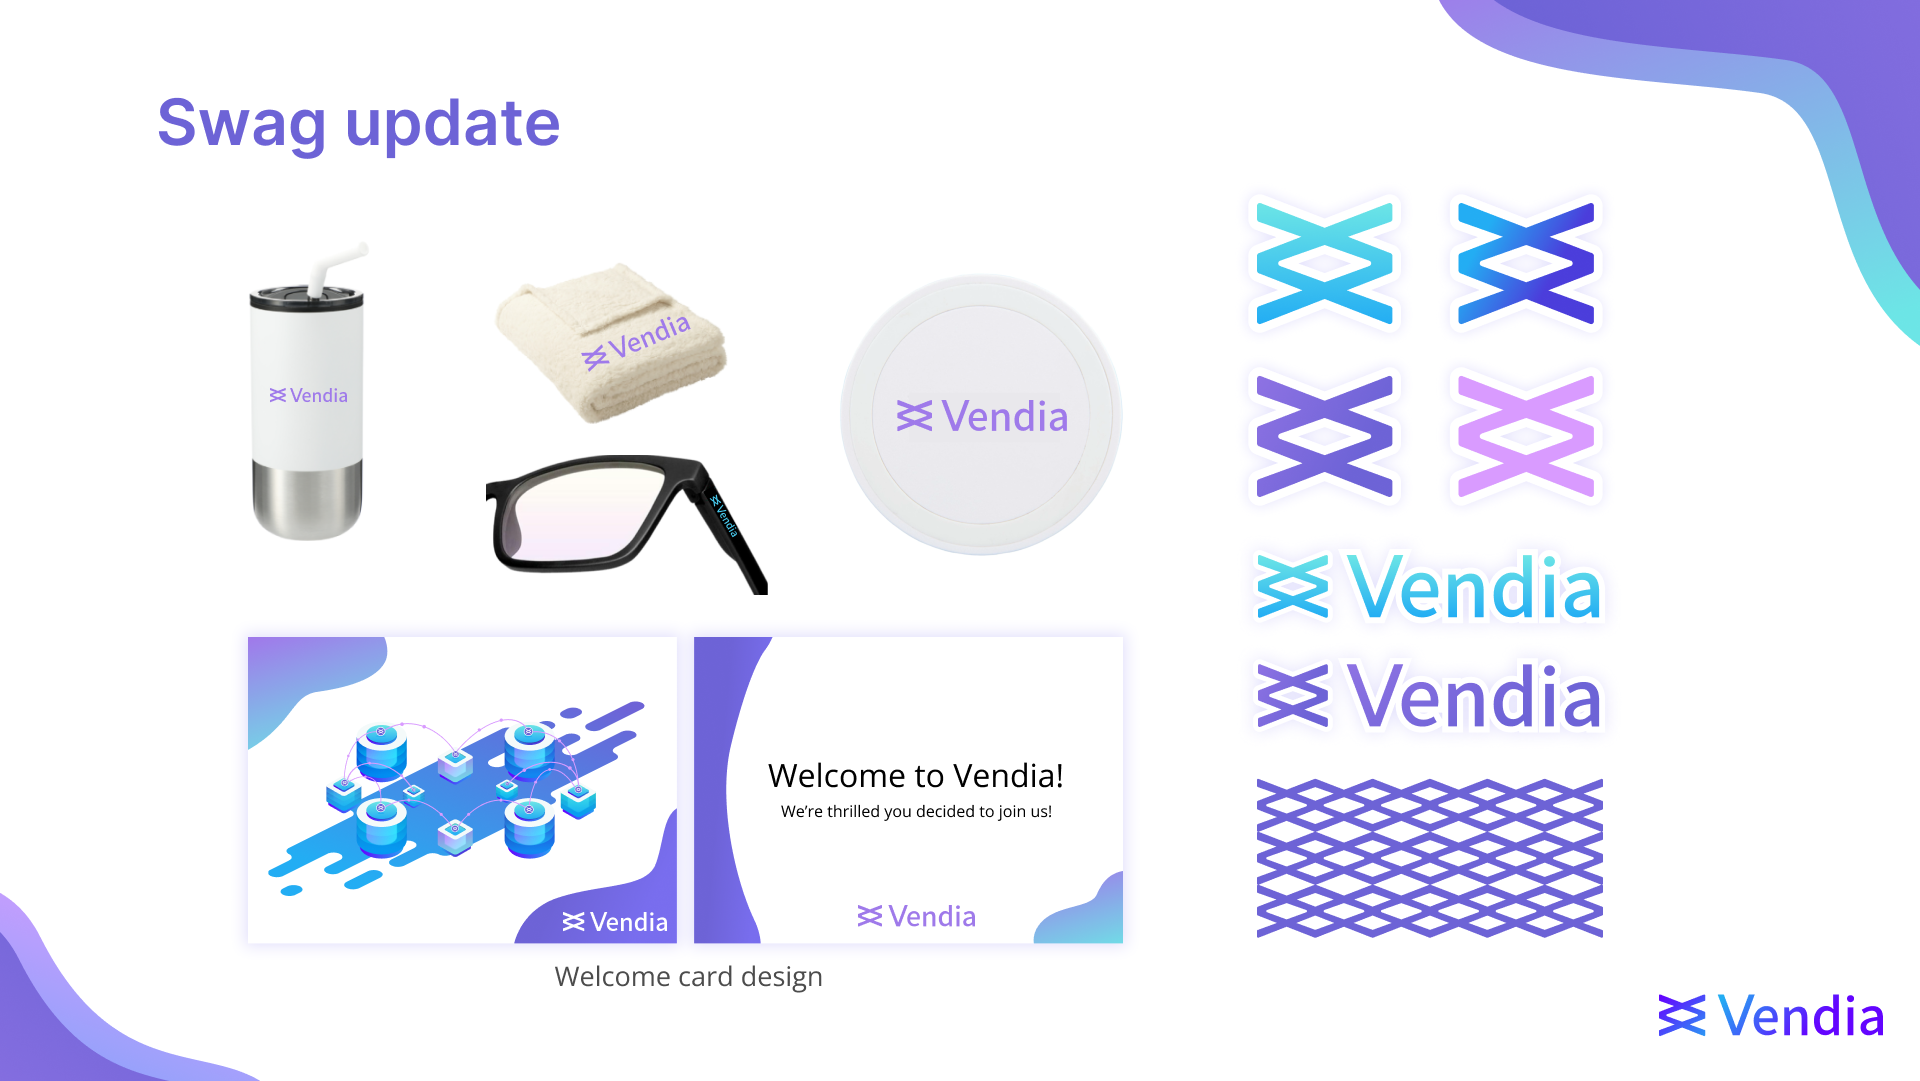 Swag such as a travel mug, frisbee, sunglasses, and stationery featuring the new Vendia logo